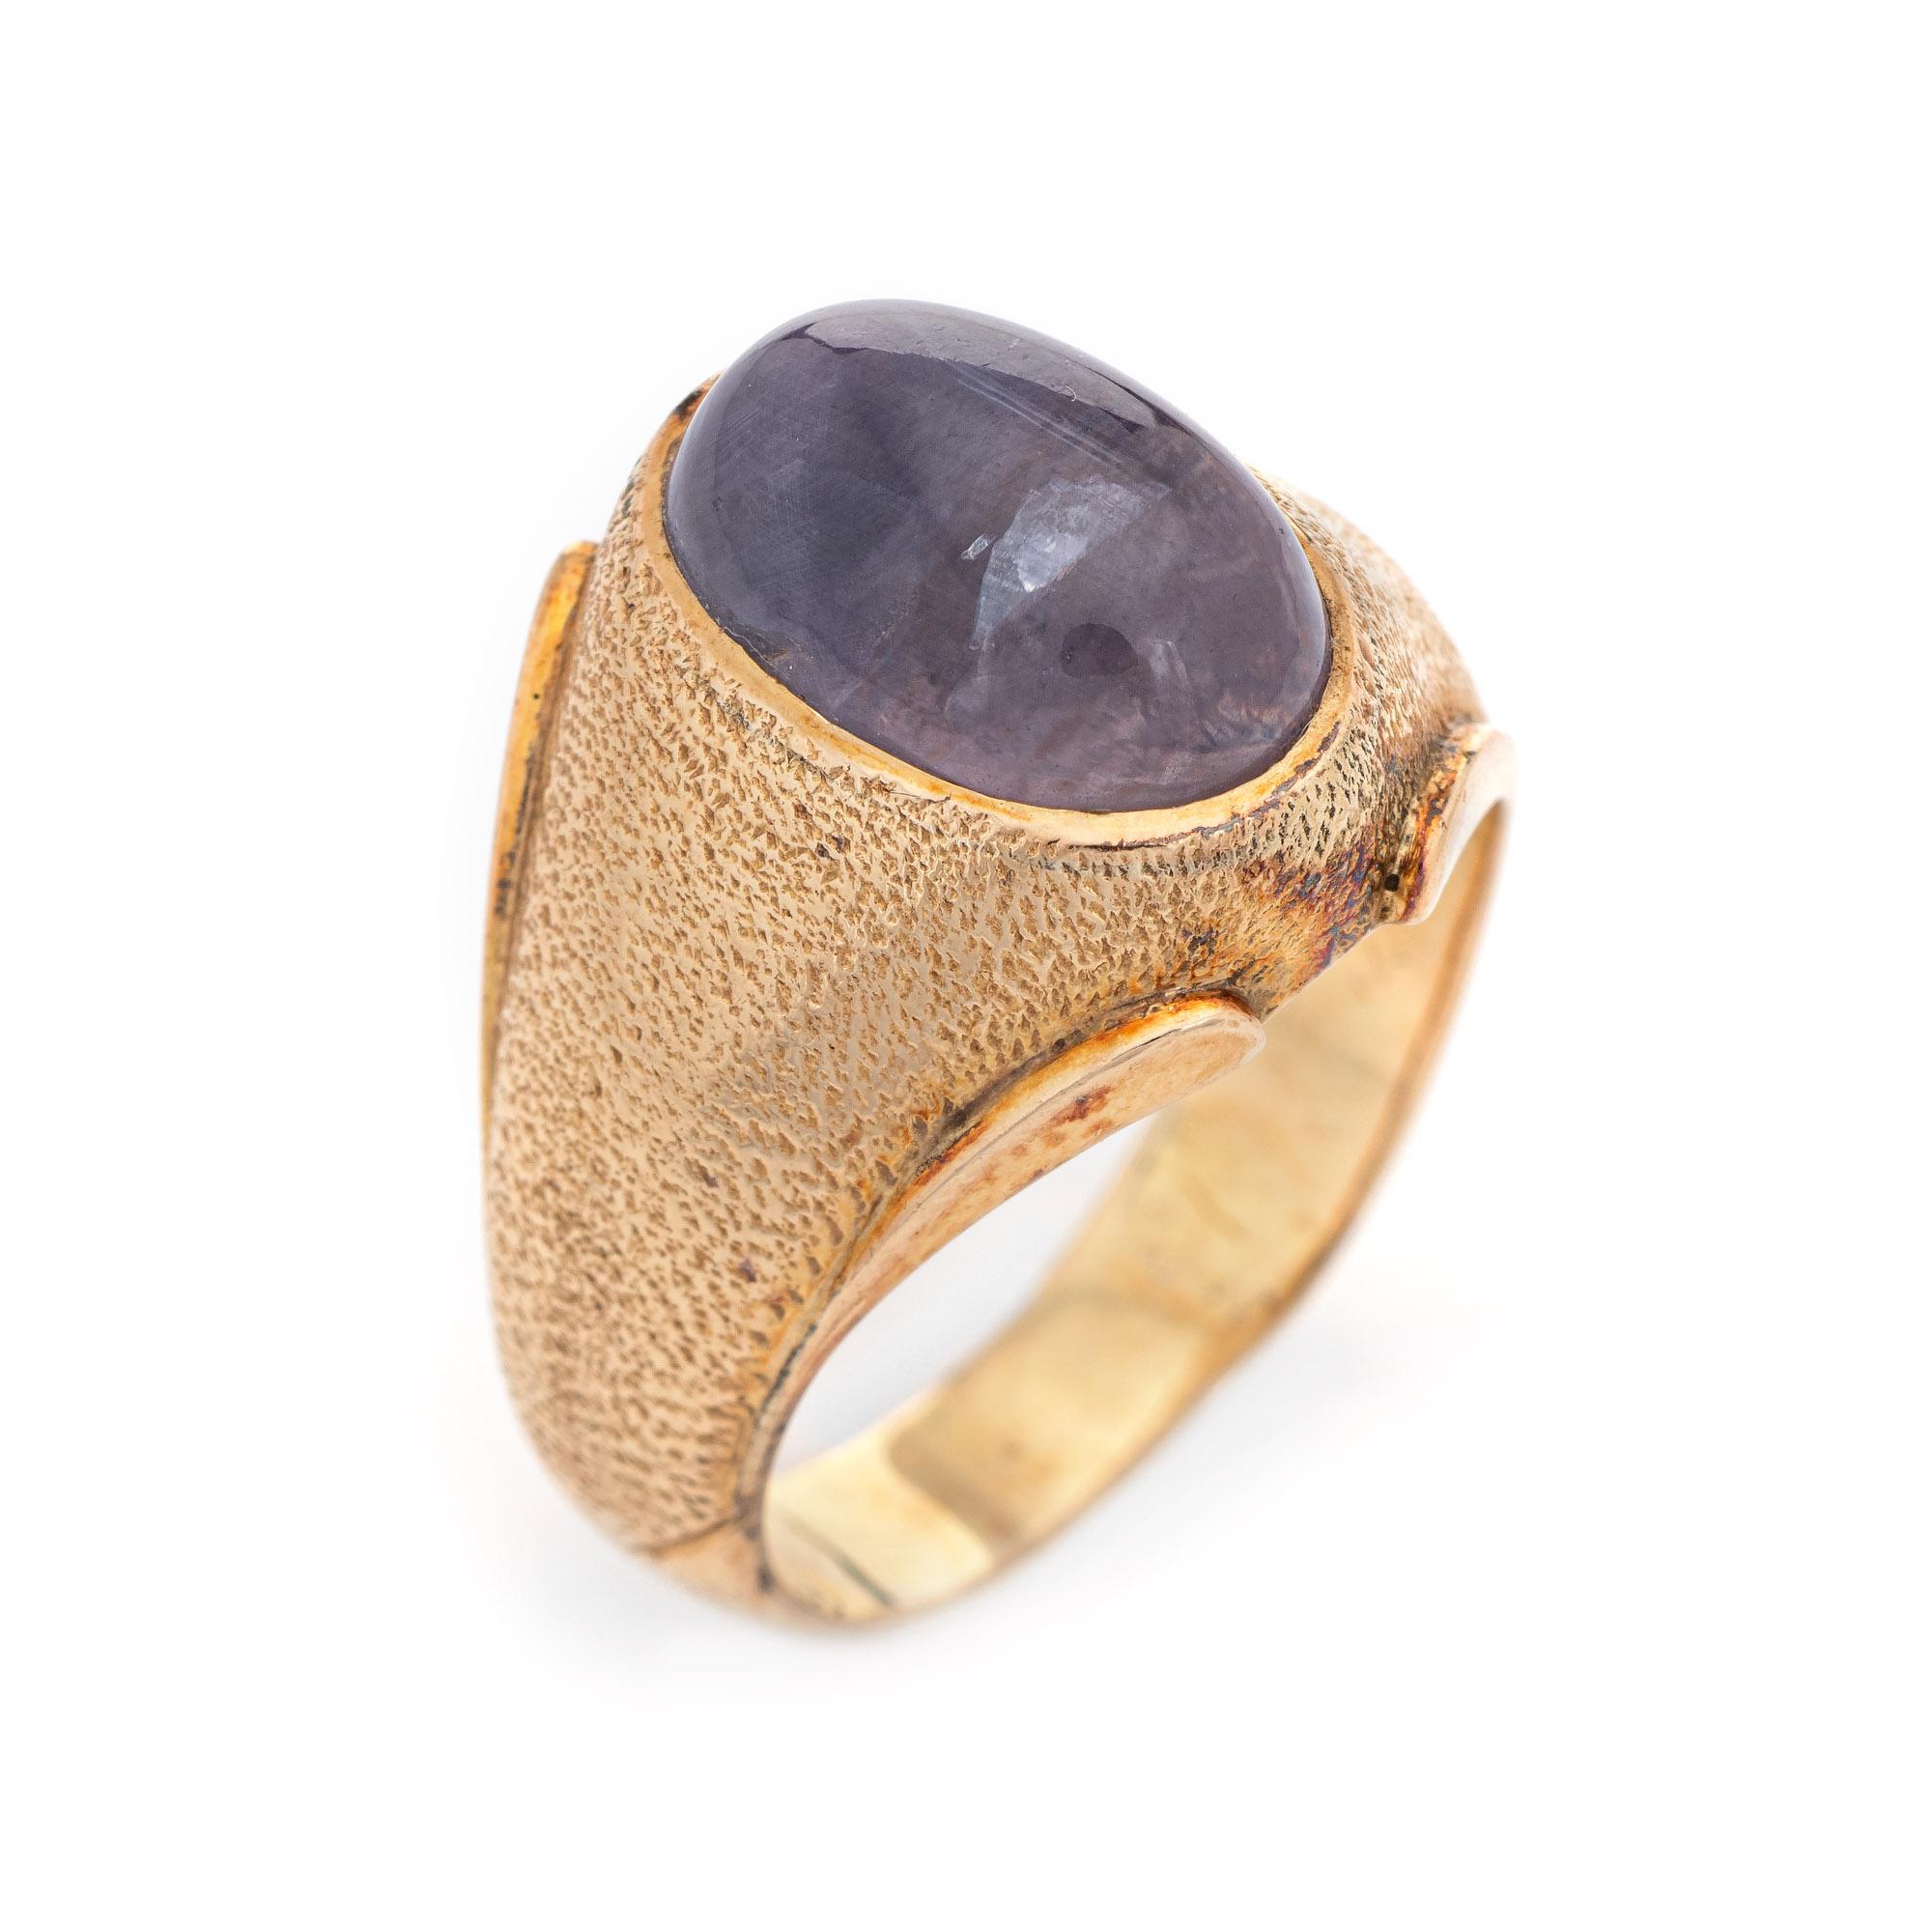 Stylish vintage natural Ceylon no heat star sapphire ring (circa 1960s to 1970s) crafted in 14 karat yellow gold. 

Cabochon cut natural Star Sapphire, approx. 9 carats (12.8 x 8.3 x 7.5mm), light purplish color, lightly included, good polish,